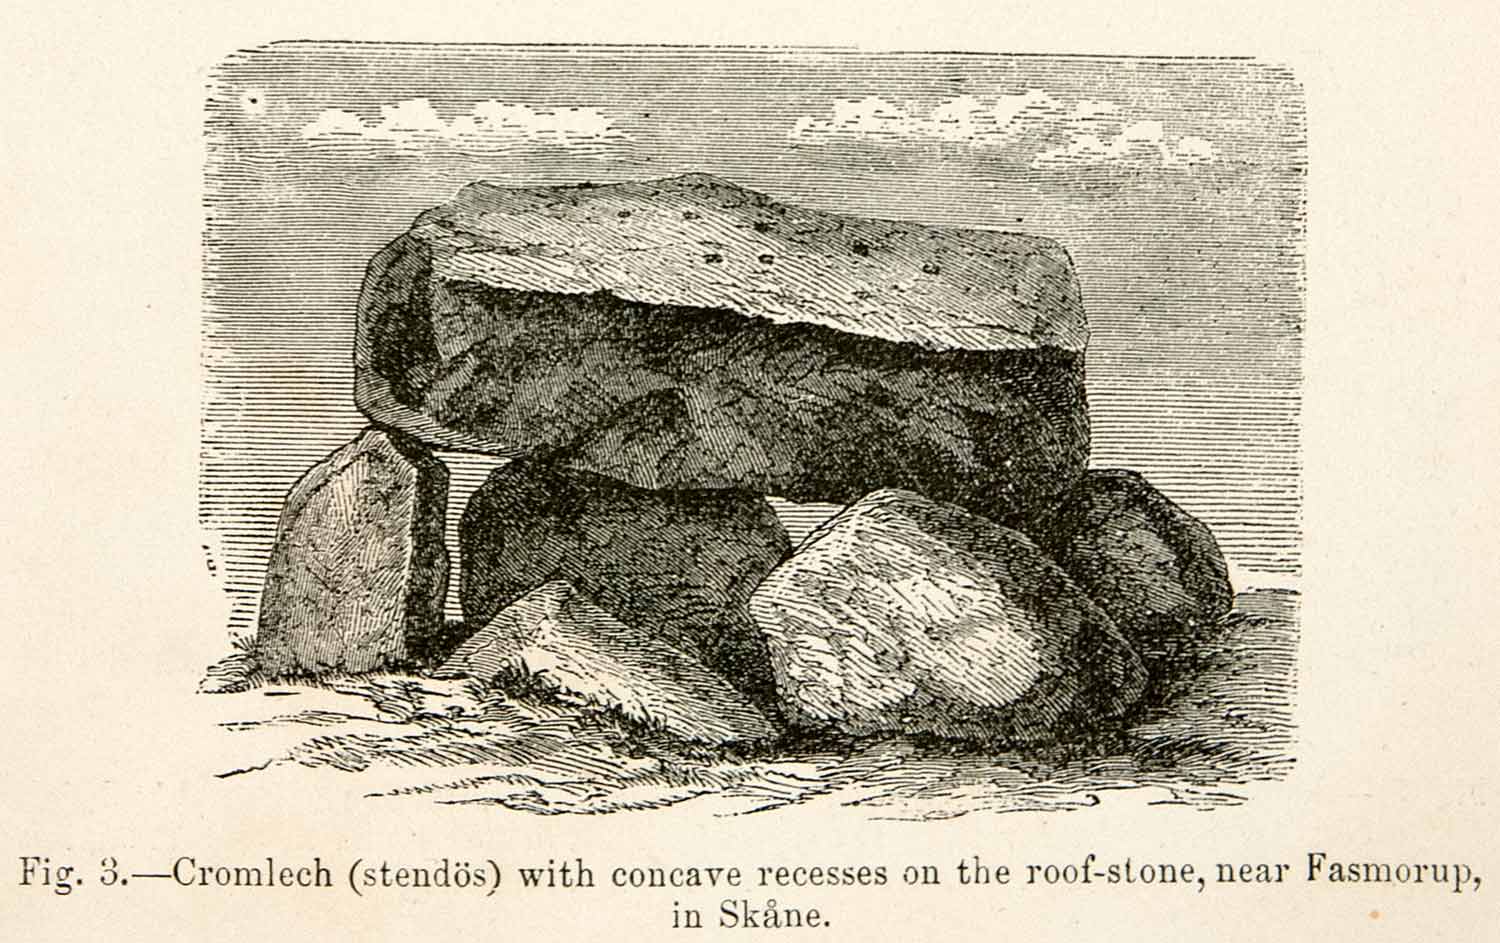 1889 Wood Engraving Cromlech Stendos Concave Recesses Roof-Stone Fasmorup XGYA7